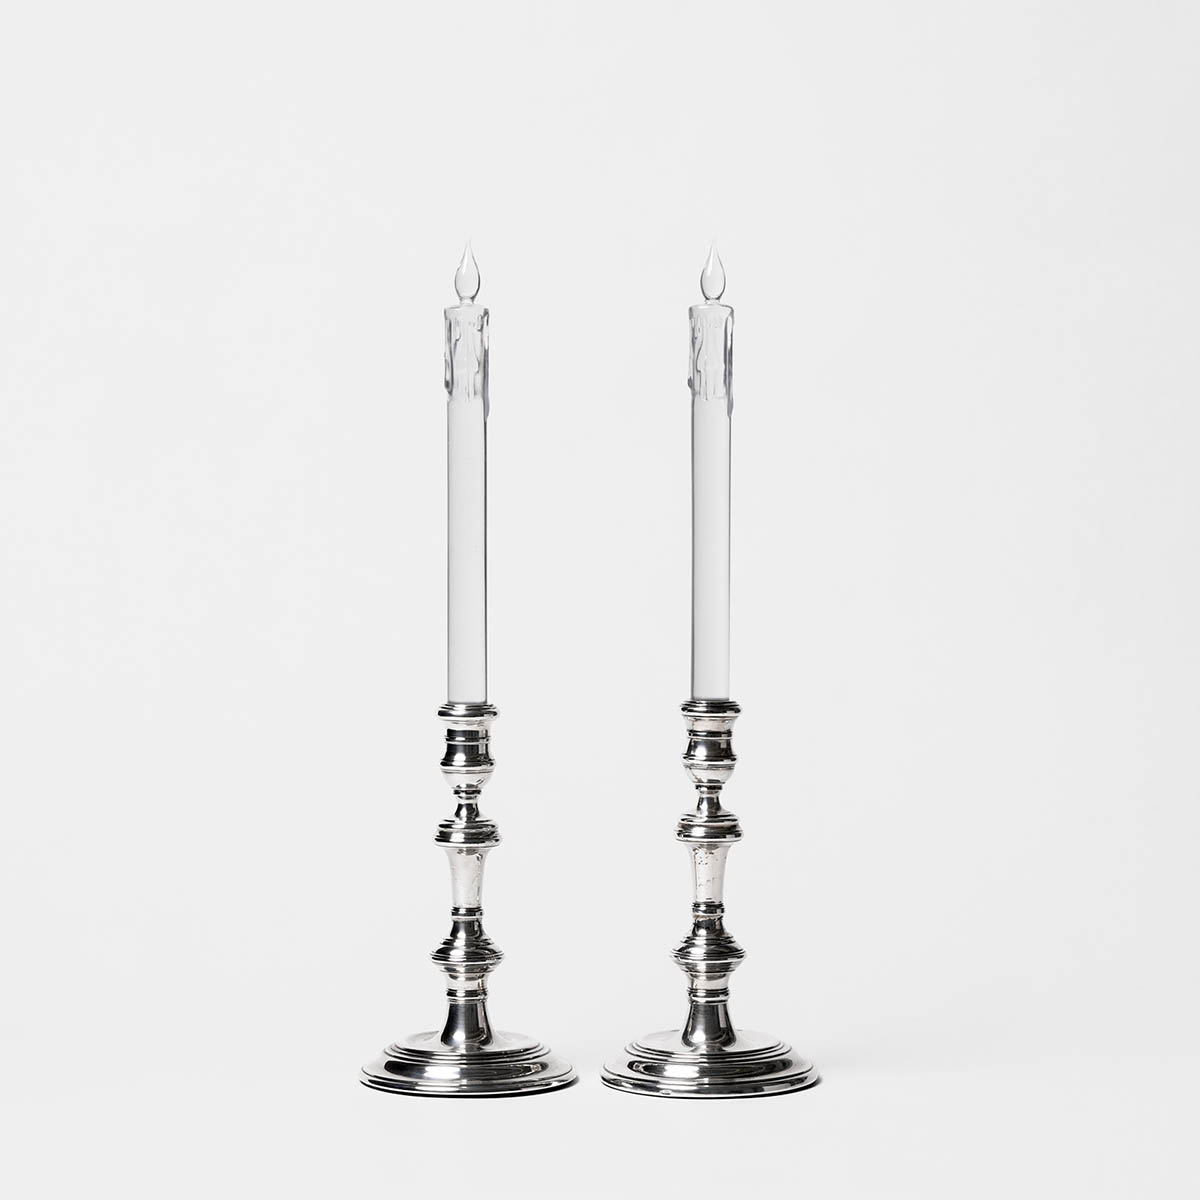 Doppelgänger, 2013, Pure silver candleholders, 3D-printed candles in resin 